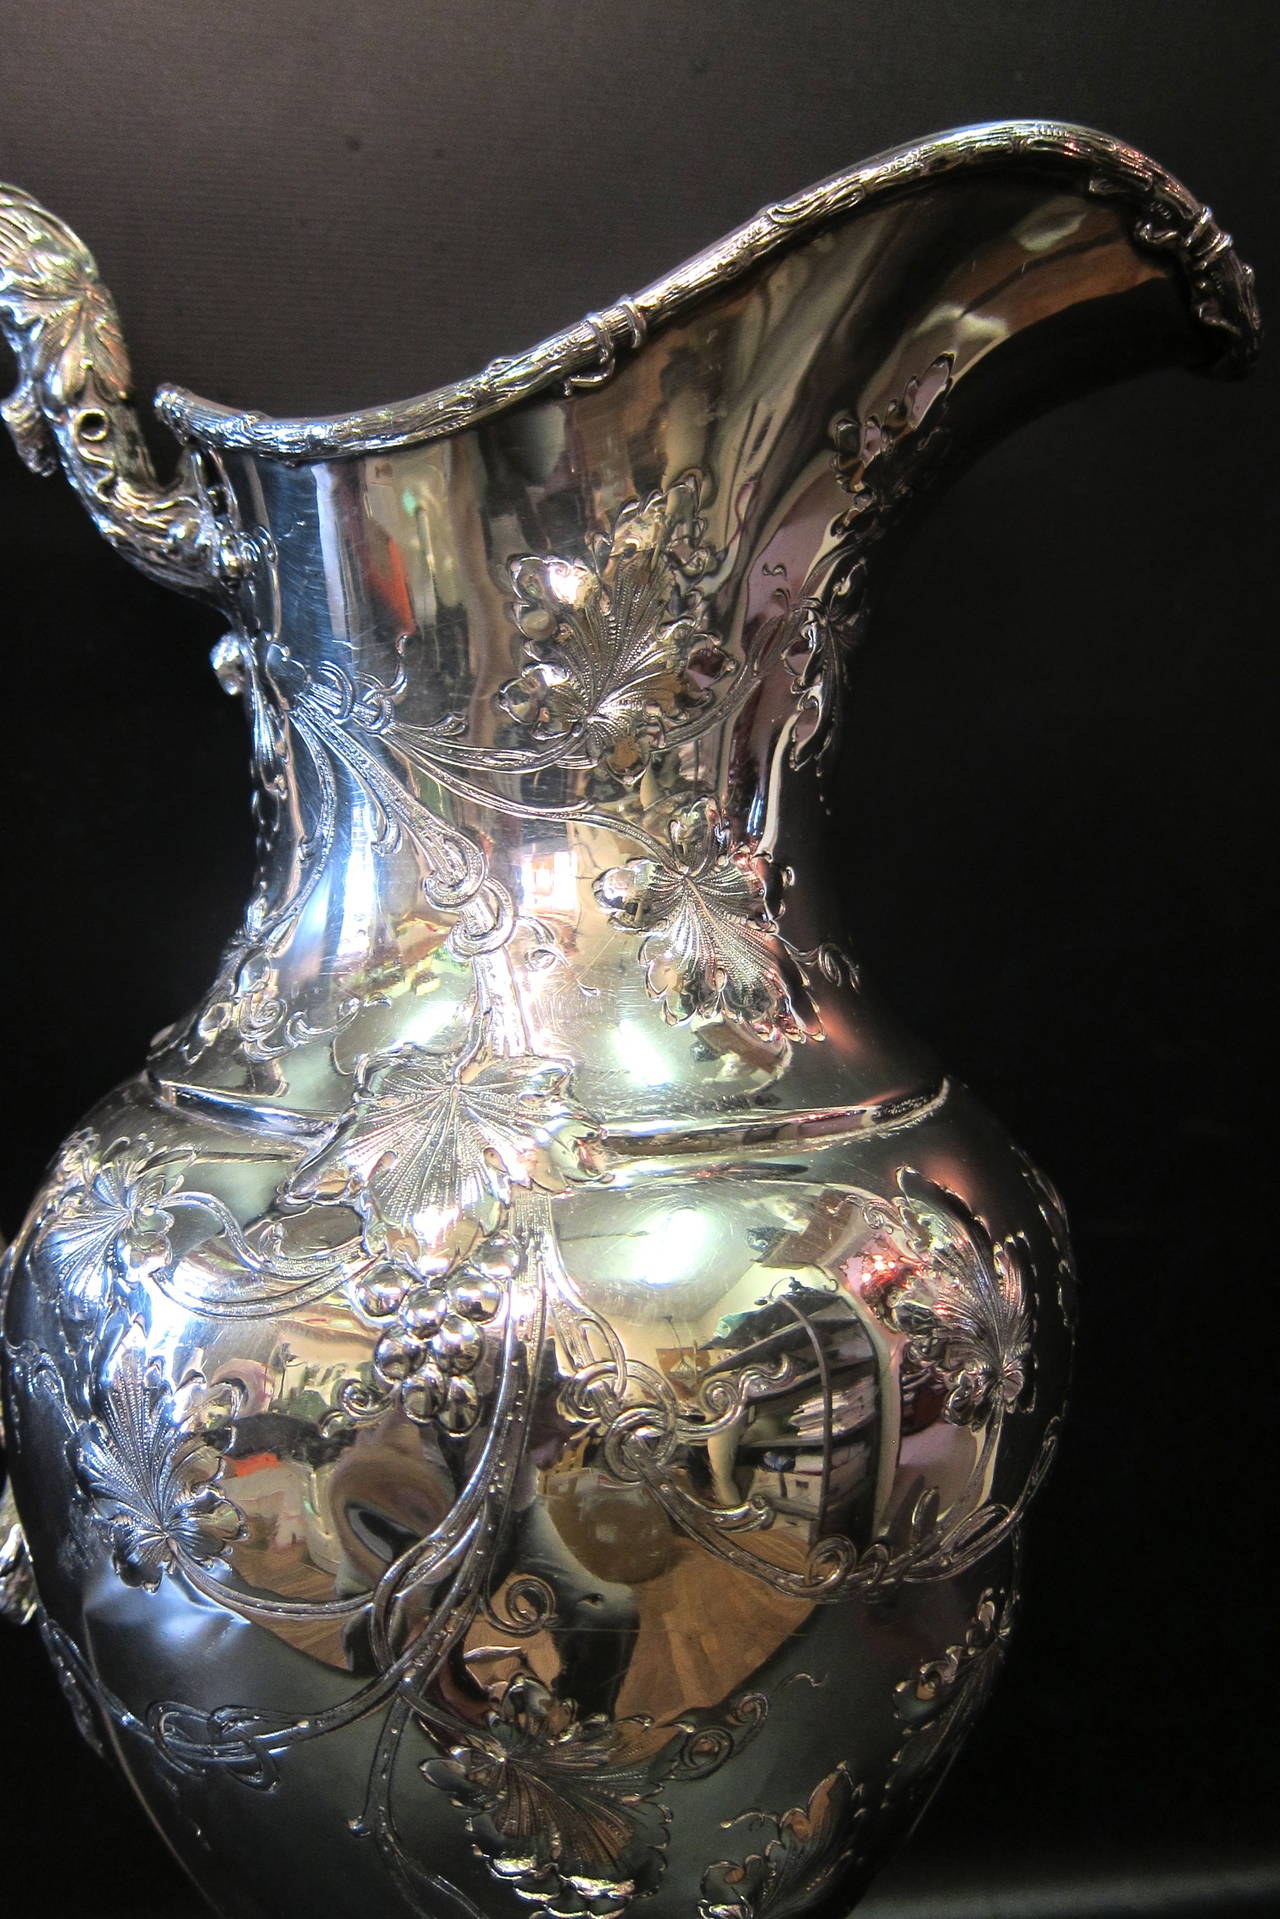 These images represent an example of the quality & beauty of the sterling silver distributed by Tiffany & Co. near the end of the 19th century. This extraordinary wine pitcher is 50 troy ounces sterling & is decorated with a detailed grapevine